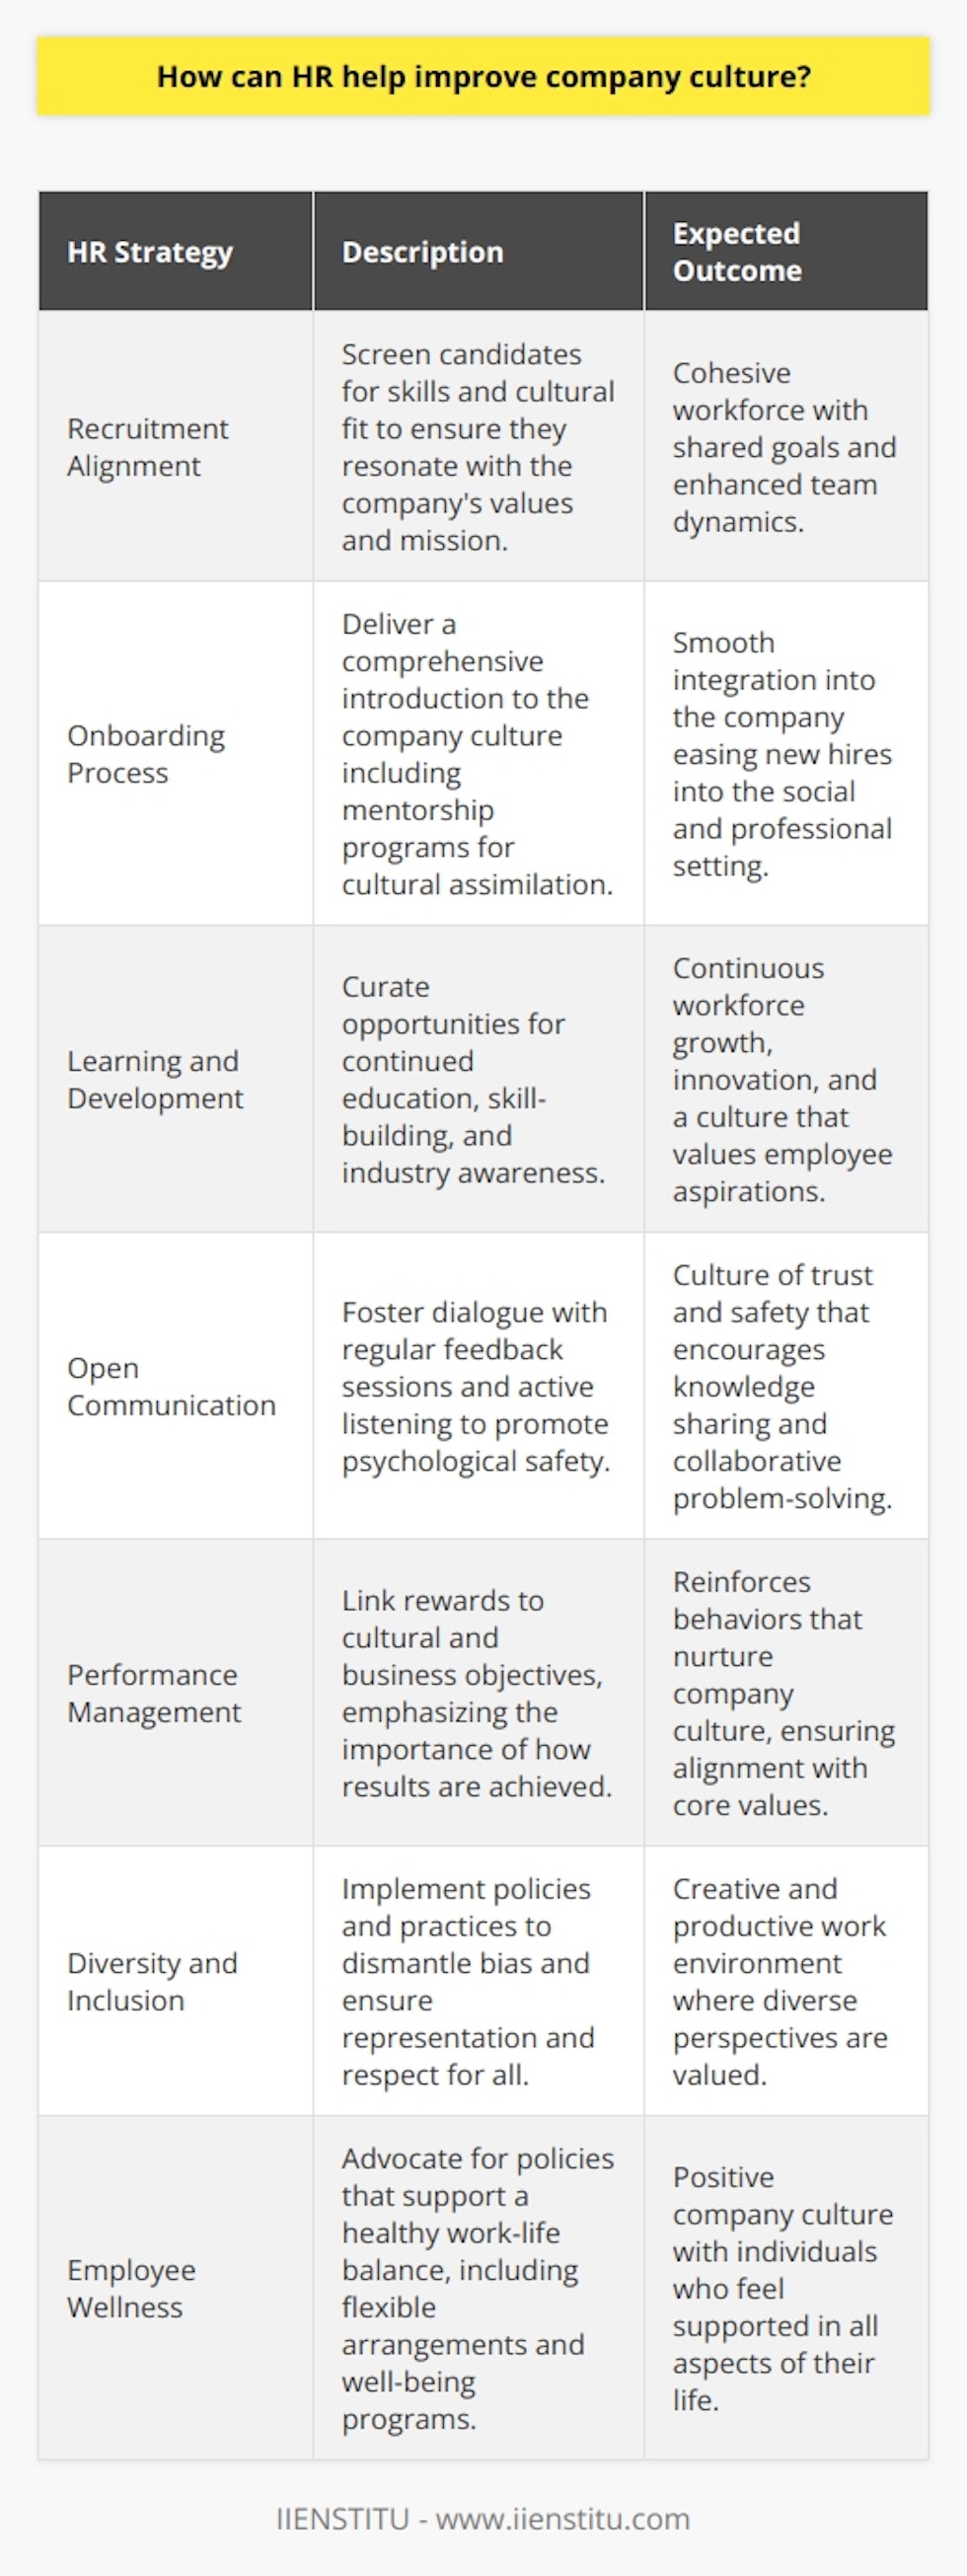 Enhancing company culture is a multi-faceted process that requires a strategic approach from human resources (HR) departments. HR professionals have the power to drive positive cultural change within organizations, and effective management of cultural elements can yield significant benefits for employee engagement and organizational success.**Recruiting with Culture in Mind**From the outset, HR can improve company culture through the recruitment process. By developing criteria that screen for both skills fit and cultural fit, HR can select individuals who not only meet the technical requirements of a position but also resonate with the company's ethos. With a focus on attracting and hiring candidates who embody the company's values and who appreciate its mission and culture, HR sets the stage for a cohesive workforce that thrives on shared goals.**Onboarding and Cultural Assimilation**A strong onboarding program is crucial to building a foundation for a positive company culture. HR's role is to ensure this process equips new hires with an understanding of the organization's culture. Beyond administrative orientation, onboarding should immerse new employees in the company's values, communication style, and operational rhythms. A mentorship program, for instance, can further support cultural assimilation, facilitating a warm welcome and offering newcomers a resource for navigating the company's social and professional landscape.**Facilitating Learning and Development**Ongoing development is a cornerstone of a vibrant company culture. HR departments that curate opportunities for employees to learn new skills, gain knowledge, and stay abreast of industry trends are investing in an adaptive, innovative workplace. Such initiatives not only foster professional growth but also signal that the organization values its employees' potential and aspirations, contributing to a more engaged and loyal workforce.**Encouraging Open Communication**Cultivating an environment where open communication flourishes is a direct responsibility of HR. Establishing regular forums for employee feedback, engaging in active listening, and encouraging transparency can help create a sense of psychological safety where employees feel comfortable sharing ideas and challenges. HR can also play a mediation role, resolving conflicts that may arise which, left unchecked, could erode trust and negatively impact the company’s culture.**Performance Management Aligned with Cultural Values**A transparent and equitable performance management system allows HR to demonstrate the company's commitment to recognizing and rewarding contributions that align with cultural and business objectives. By linking rewards and recognitions to not only what is achieved but also how it is achieved, HR encourages behaviors that nurture the company's culture. Performance reviews become an opportunity for constructive dialogue about individual and collective cultural alignment, as well as personal progress and organizational growth.**Defining Diversity and Inclusion Practices**An environment that cherishes diversity and insists on inclusion can unleash creativity and productivity. HR's role in crafting policies and practices that dismantle bias and foster an environment where everyone feels represented and respected is crucial. This may include bias training, cultural sensitivity workshops, creating employee resource groups, and ensuring equitable opportunities for advancement. Diversity not only benefits the culture but enhances the company's ability to serve a diverse customer base.**Supporting Employee Wellness and Balance**Understanding that employee well-being is essential to maintaining a positive company culture, HR should advocate for policies and benefits that encourage a healthy work-life balance. From flexible working hours and remote work options to health programs and stress management resources, offering support in various aspects of life reflects the company’s investment in its people beyond their roles.In essence, HR's strategic involvement in shaping and elevating company culture is indispensable. Through recruitment, employee development, fostering communication, evaluating performance, promoting inclusiveness, and caring for employee well-being, HR acts as both guardian and champion of the workplace environment. When HR functions are aligned with the organization's cultural objectives, the result is a dynamic, inclusive, and supportive setting that energizes employees and propels the organization forward.